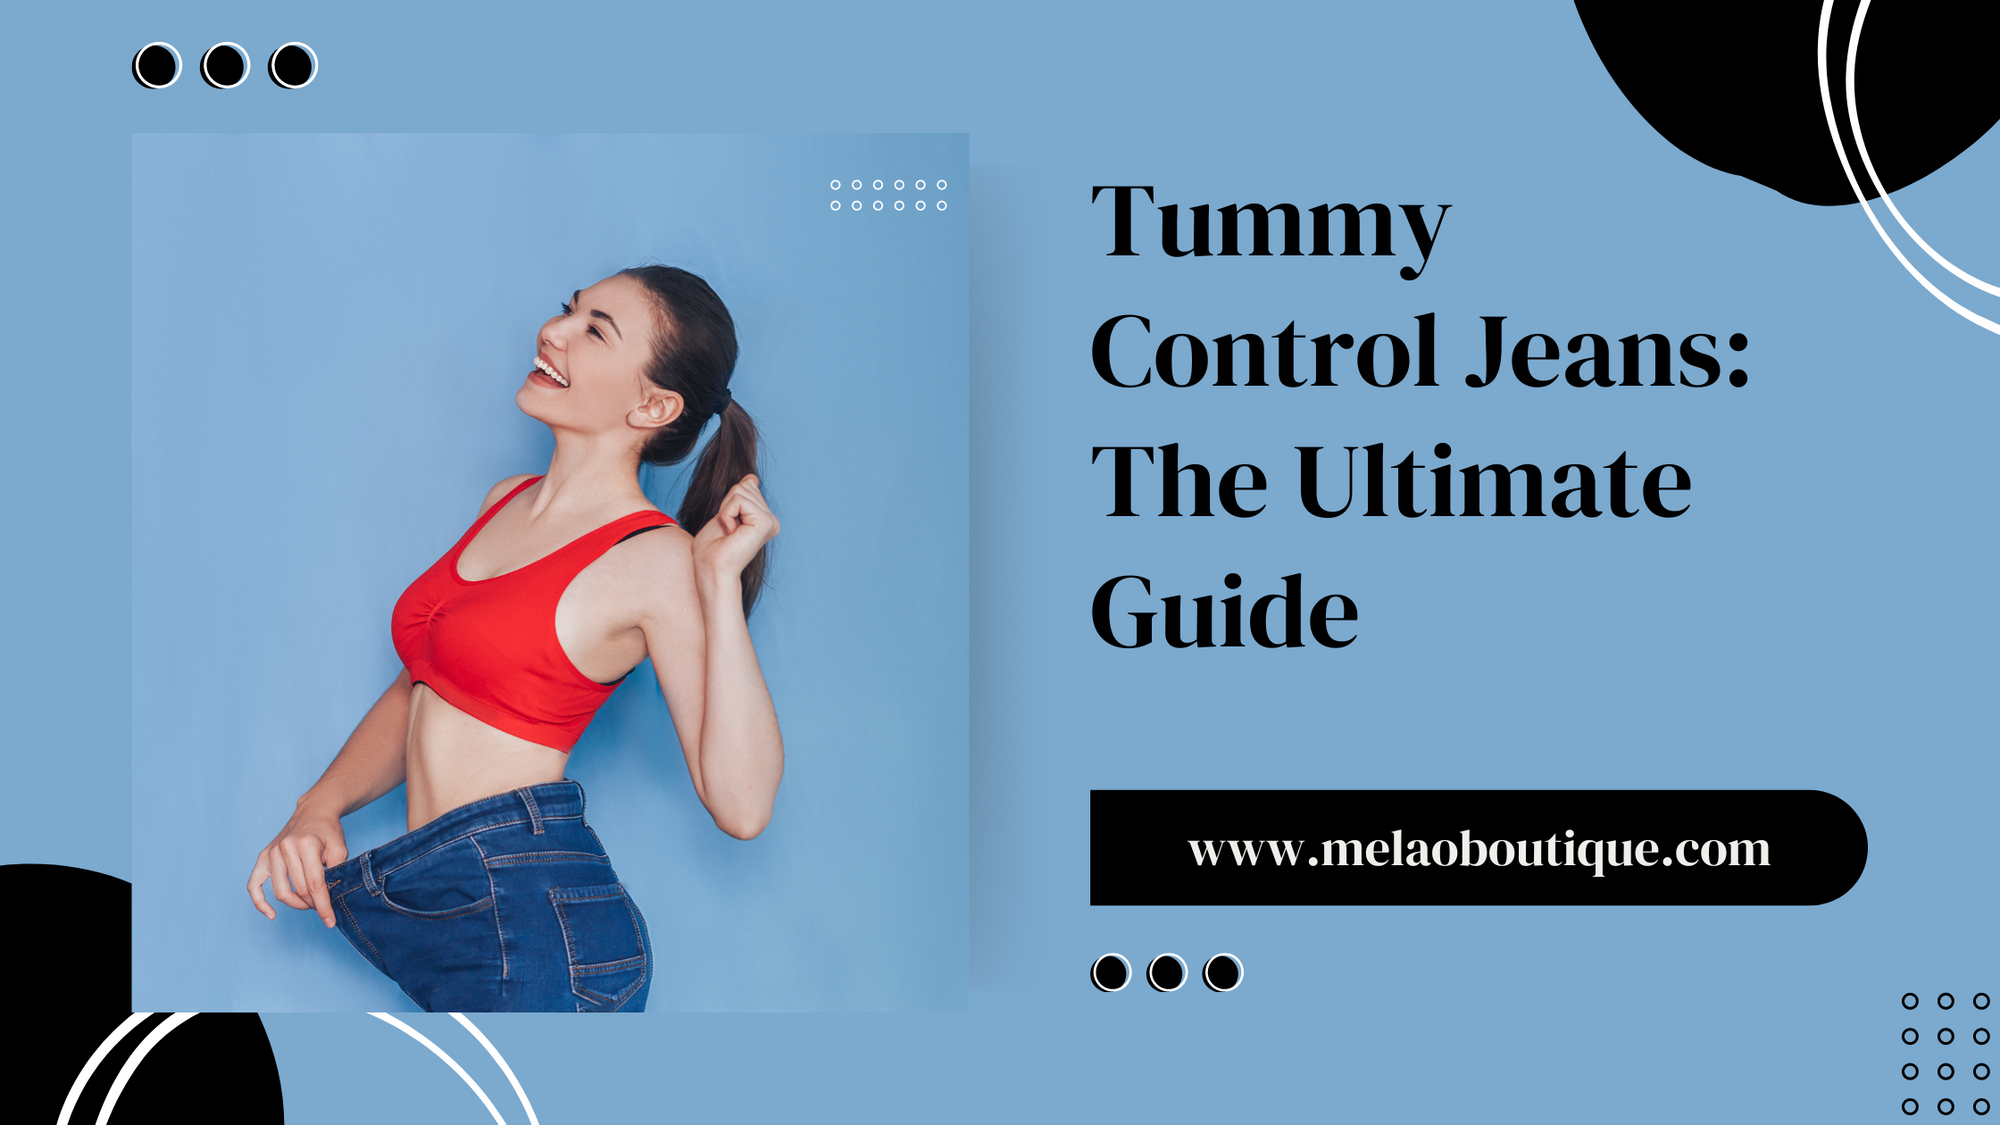 Tummy Control Jeans The Ultimate Guide